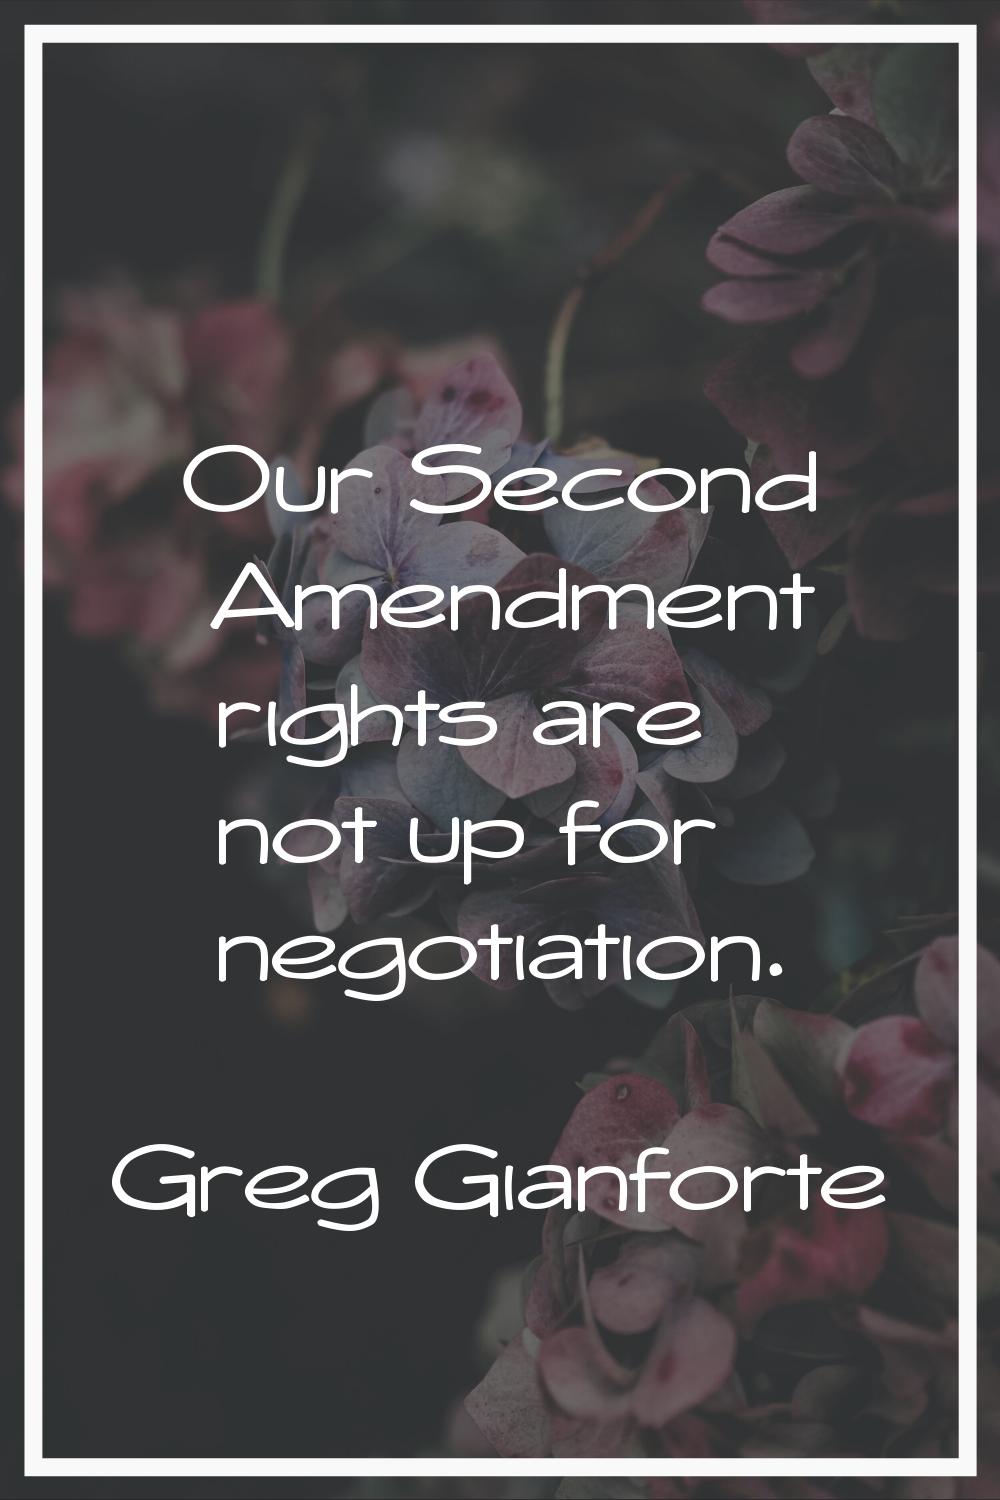 Our Second Amendment rights are not up for negotiation.